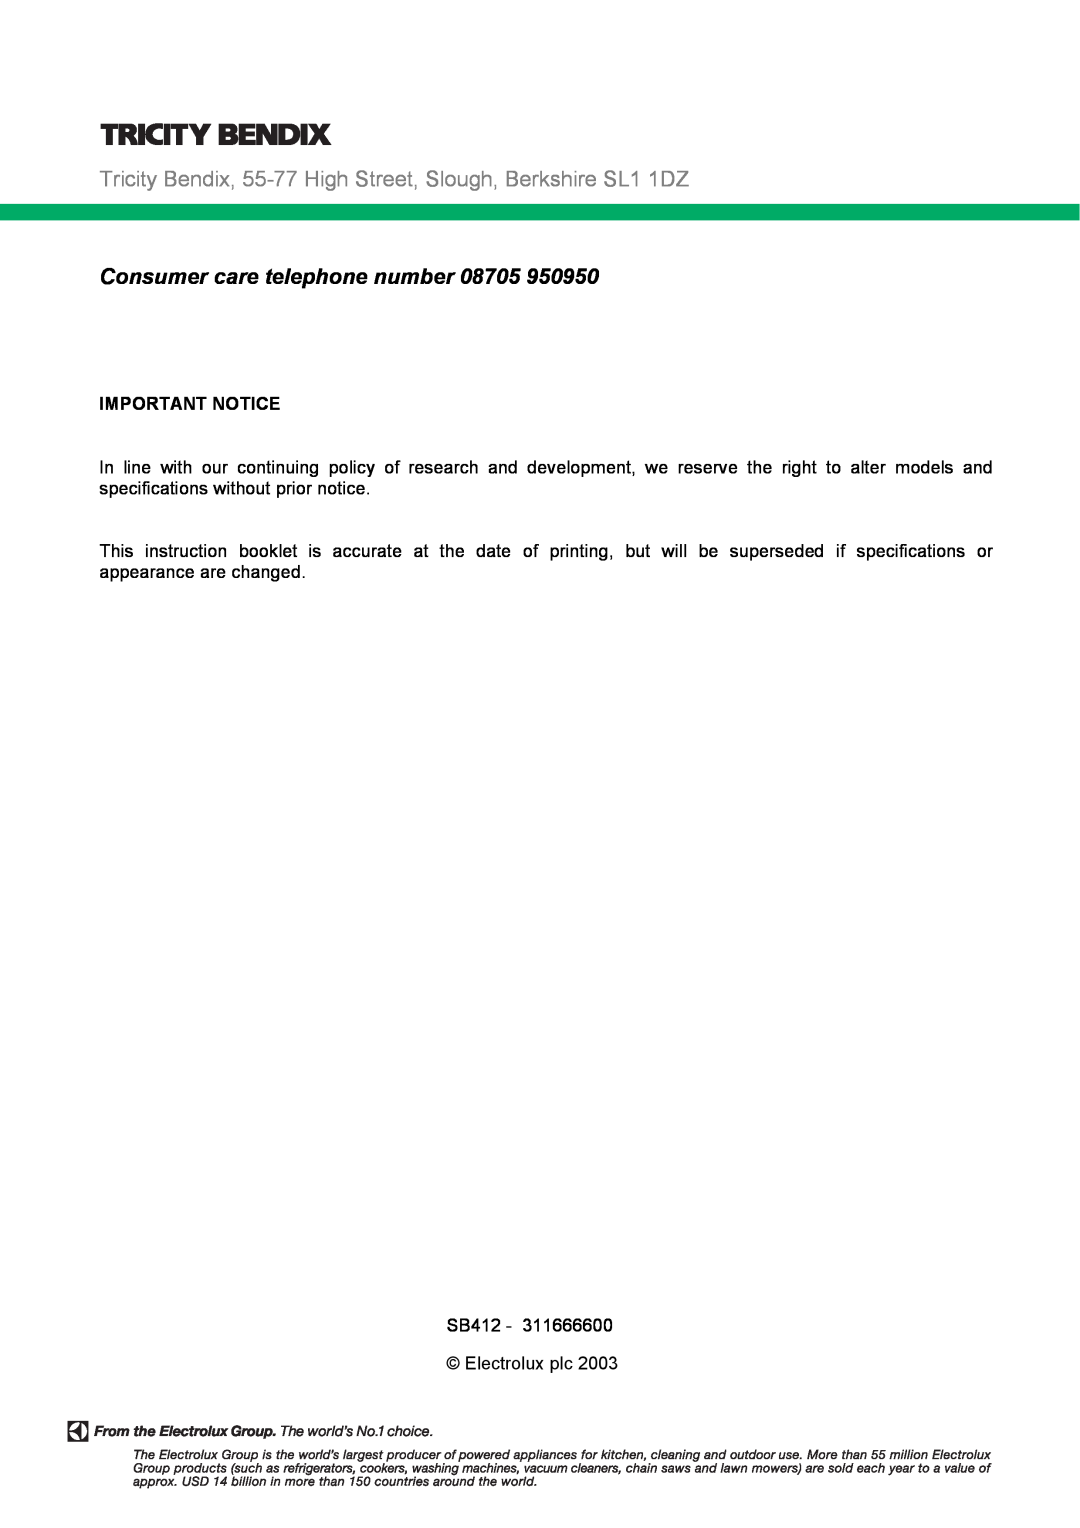 Tricity Bendix SB412 installation instructions Consumer care telephone number, Important Notice 